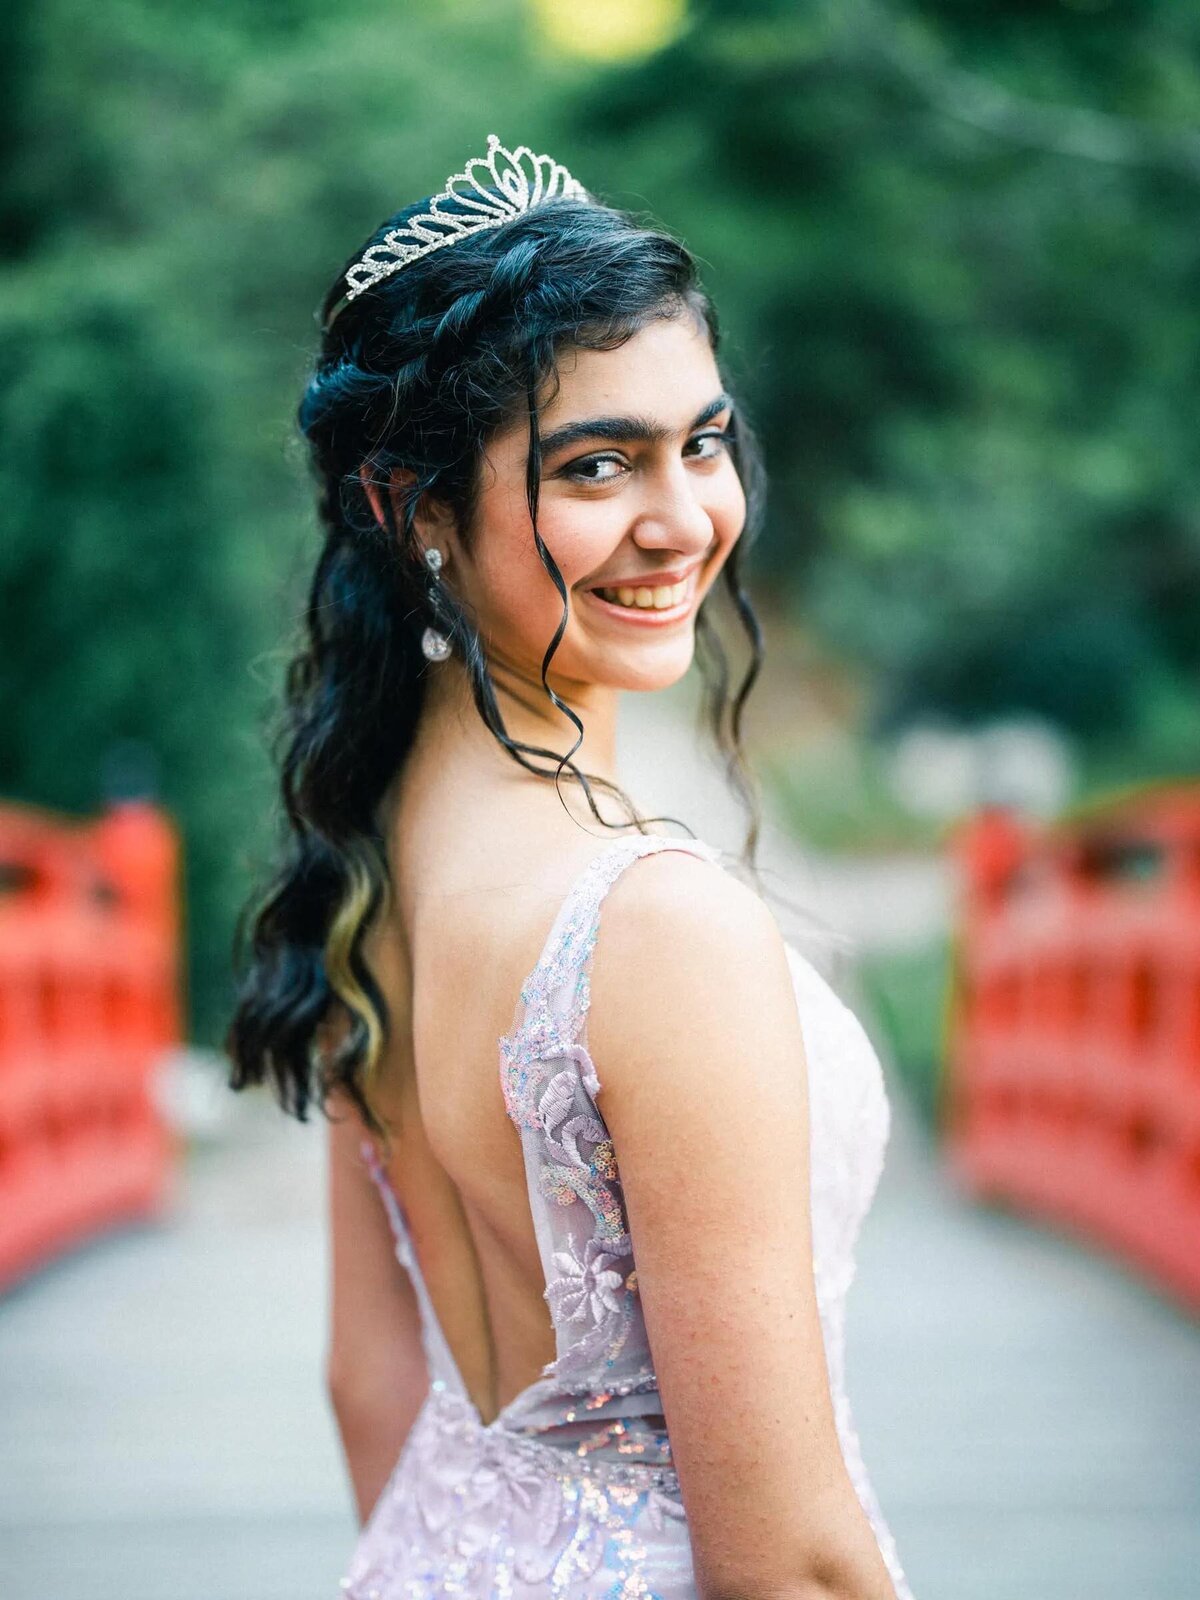 A teenager in a dress and tiara looking over her shoulder.